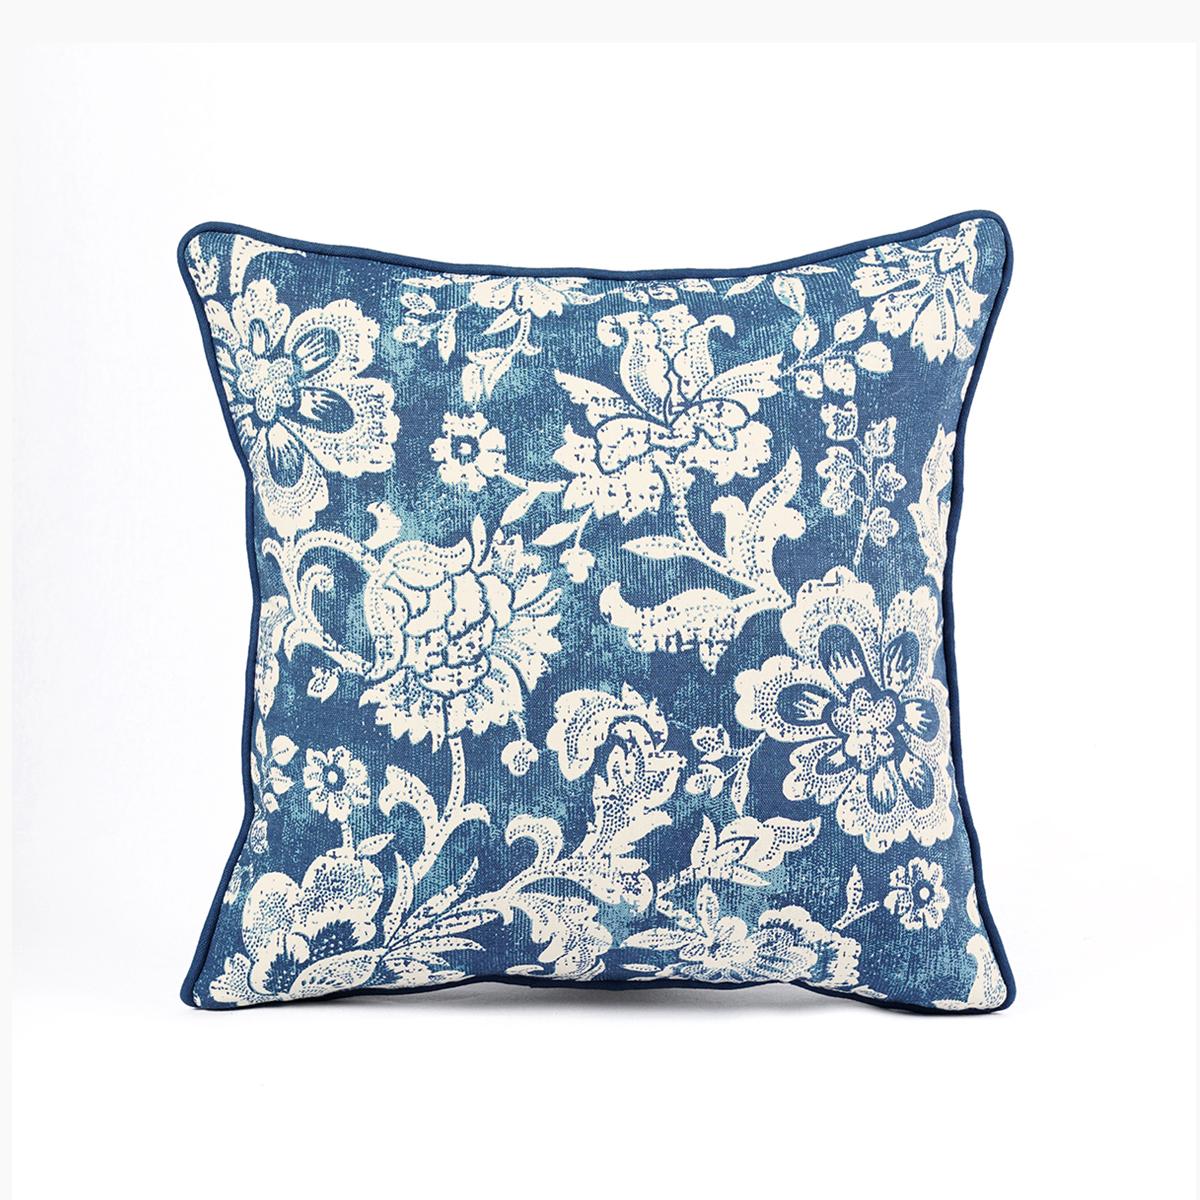 Indigo DOMINOTERIE bold floral print cotton pillow cover, sizes available